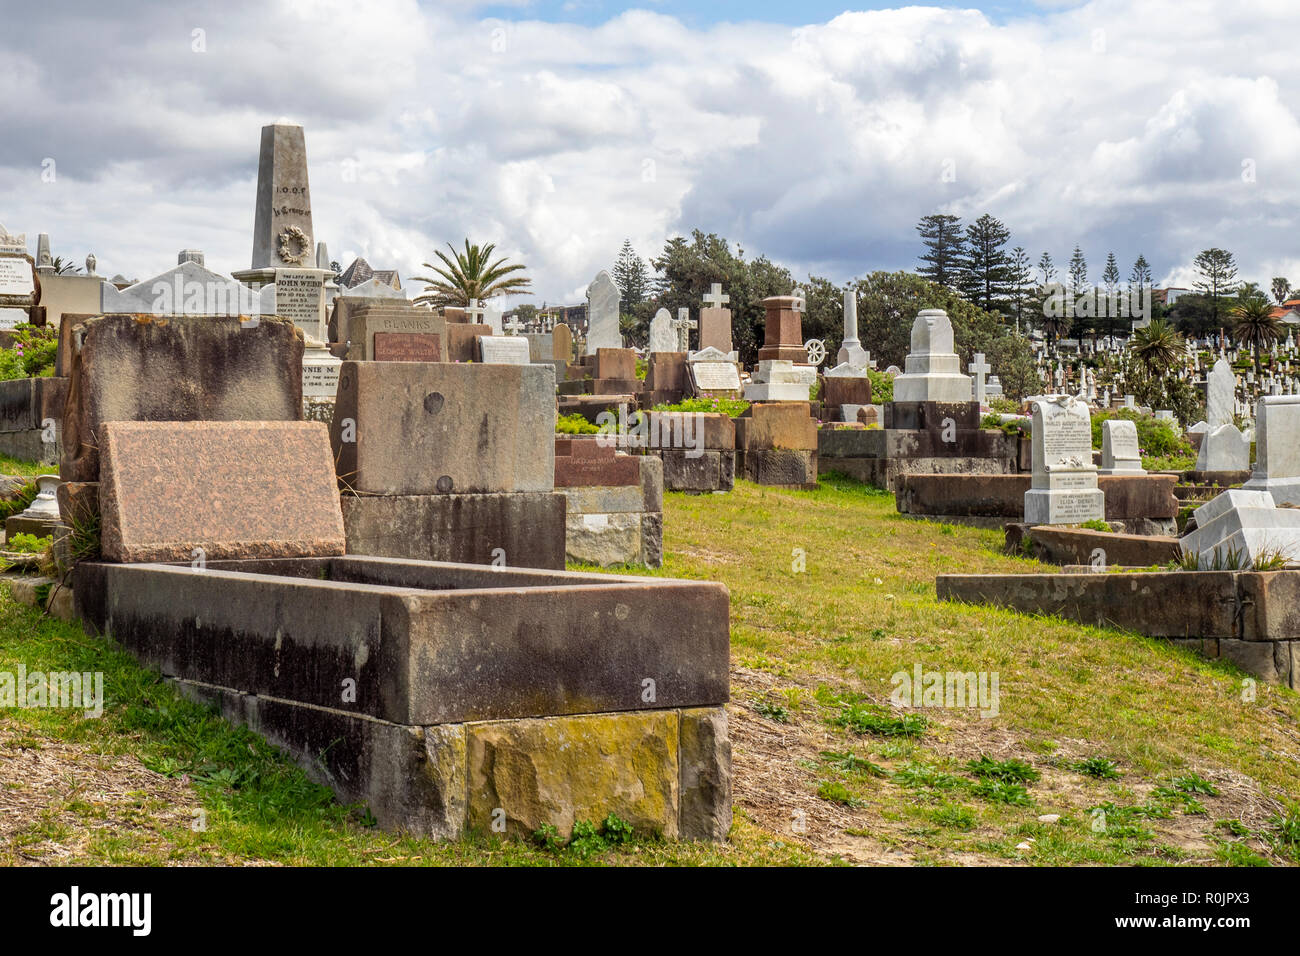 Marble headstones and graves at Waverley Cemetery Bronte Sydney NSW Australia. Stock Photo